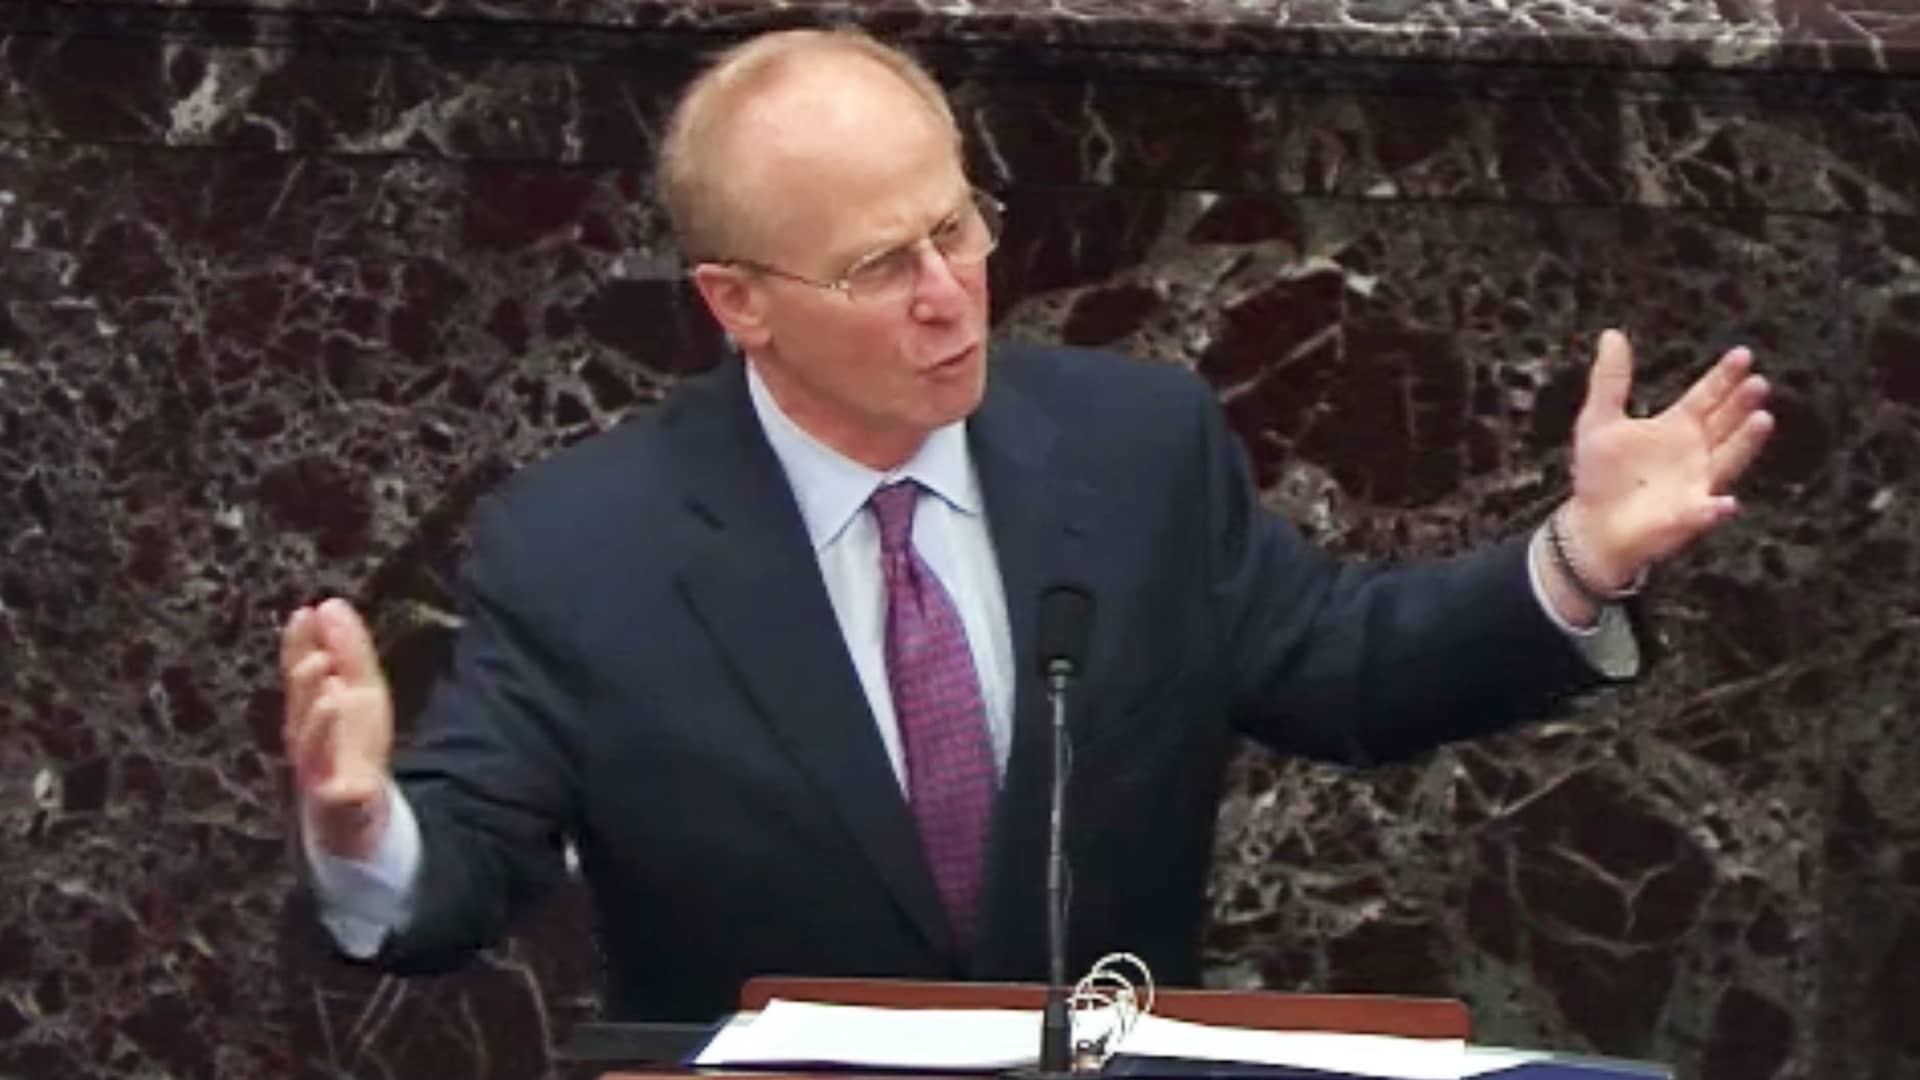 David Schoen, defense attorney for Donald Trump, speaks in the Senate Chamber in a video screenshot in Washington, D.C., on Tuesday, Feb. 9, 2021.